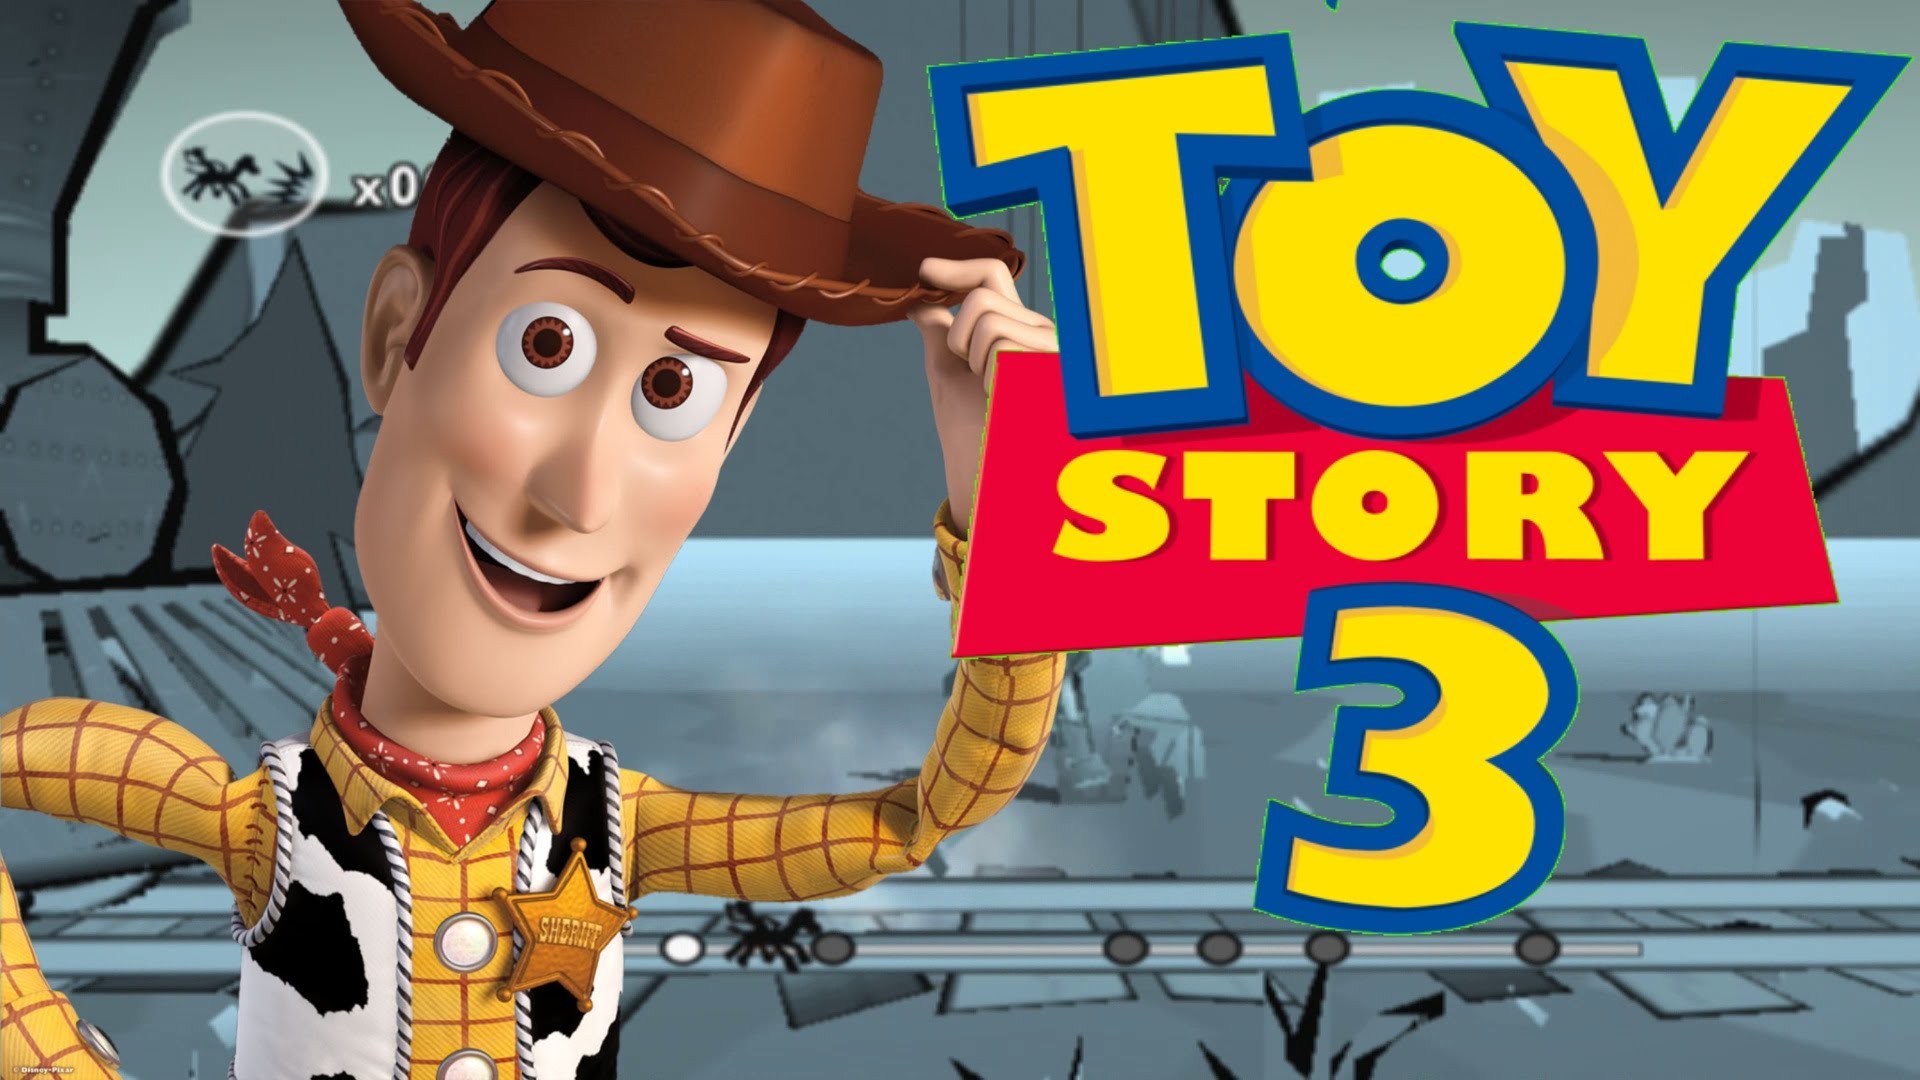 1920x1080 Toy Story 3 Video Game Sheriff Woody Switchman Gameplay for Young Children  - YouTube